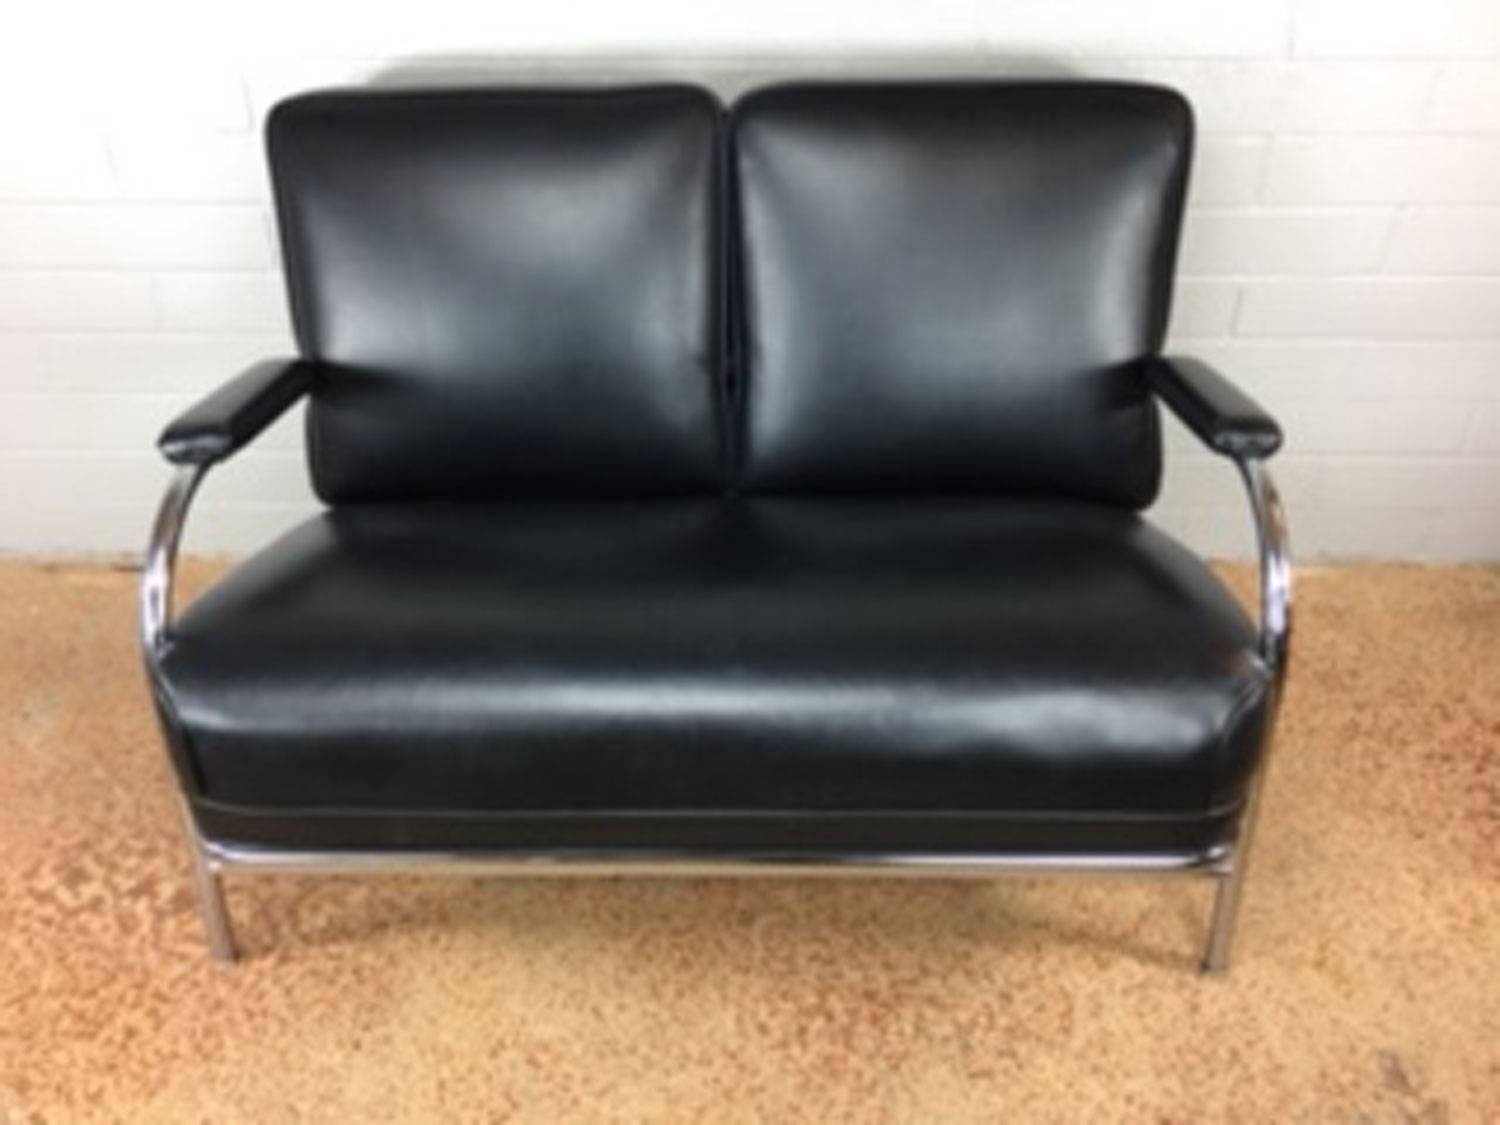 Art Deco chromed loveseat by KEM Weber. Chrome is in very good condition. Heavy black Naugahyde cover material is in excellent condition. No rips, tears, wear, or holes. This KEM Weber unit is quite heavy and built to last. We have one of these